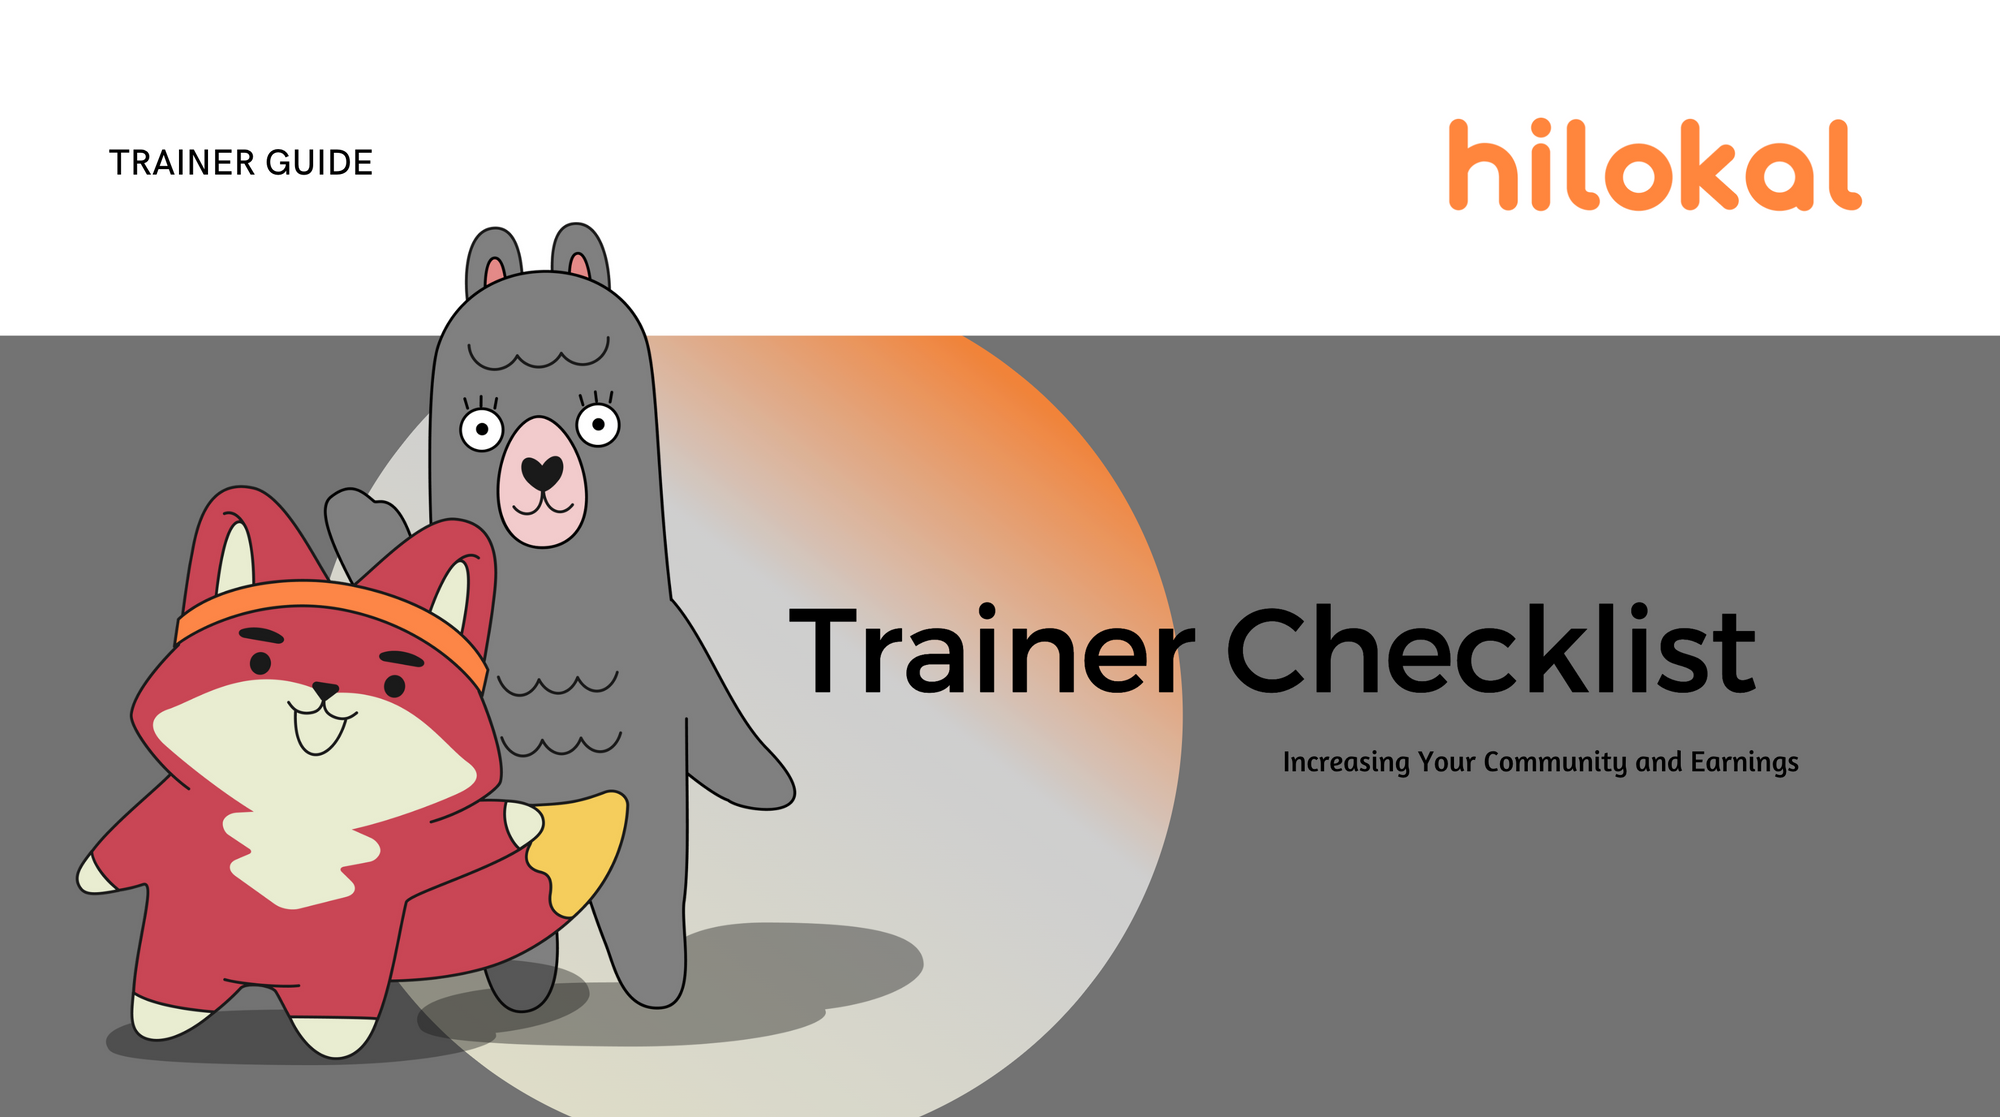 Trainer Checklist for Increasing Your Community and Earnings